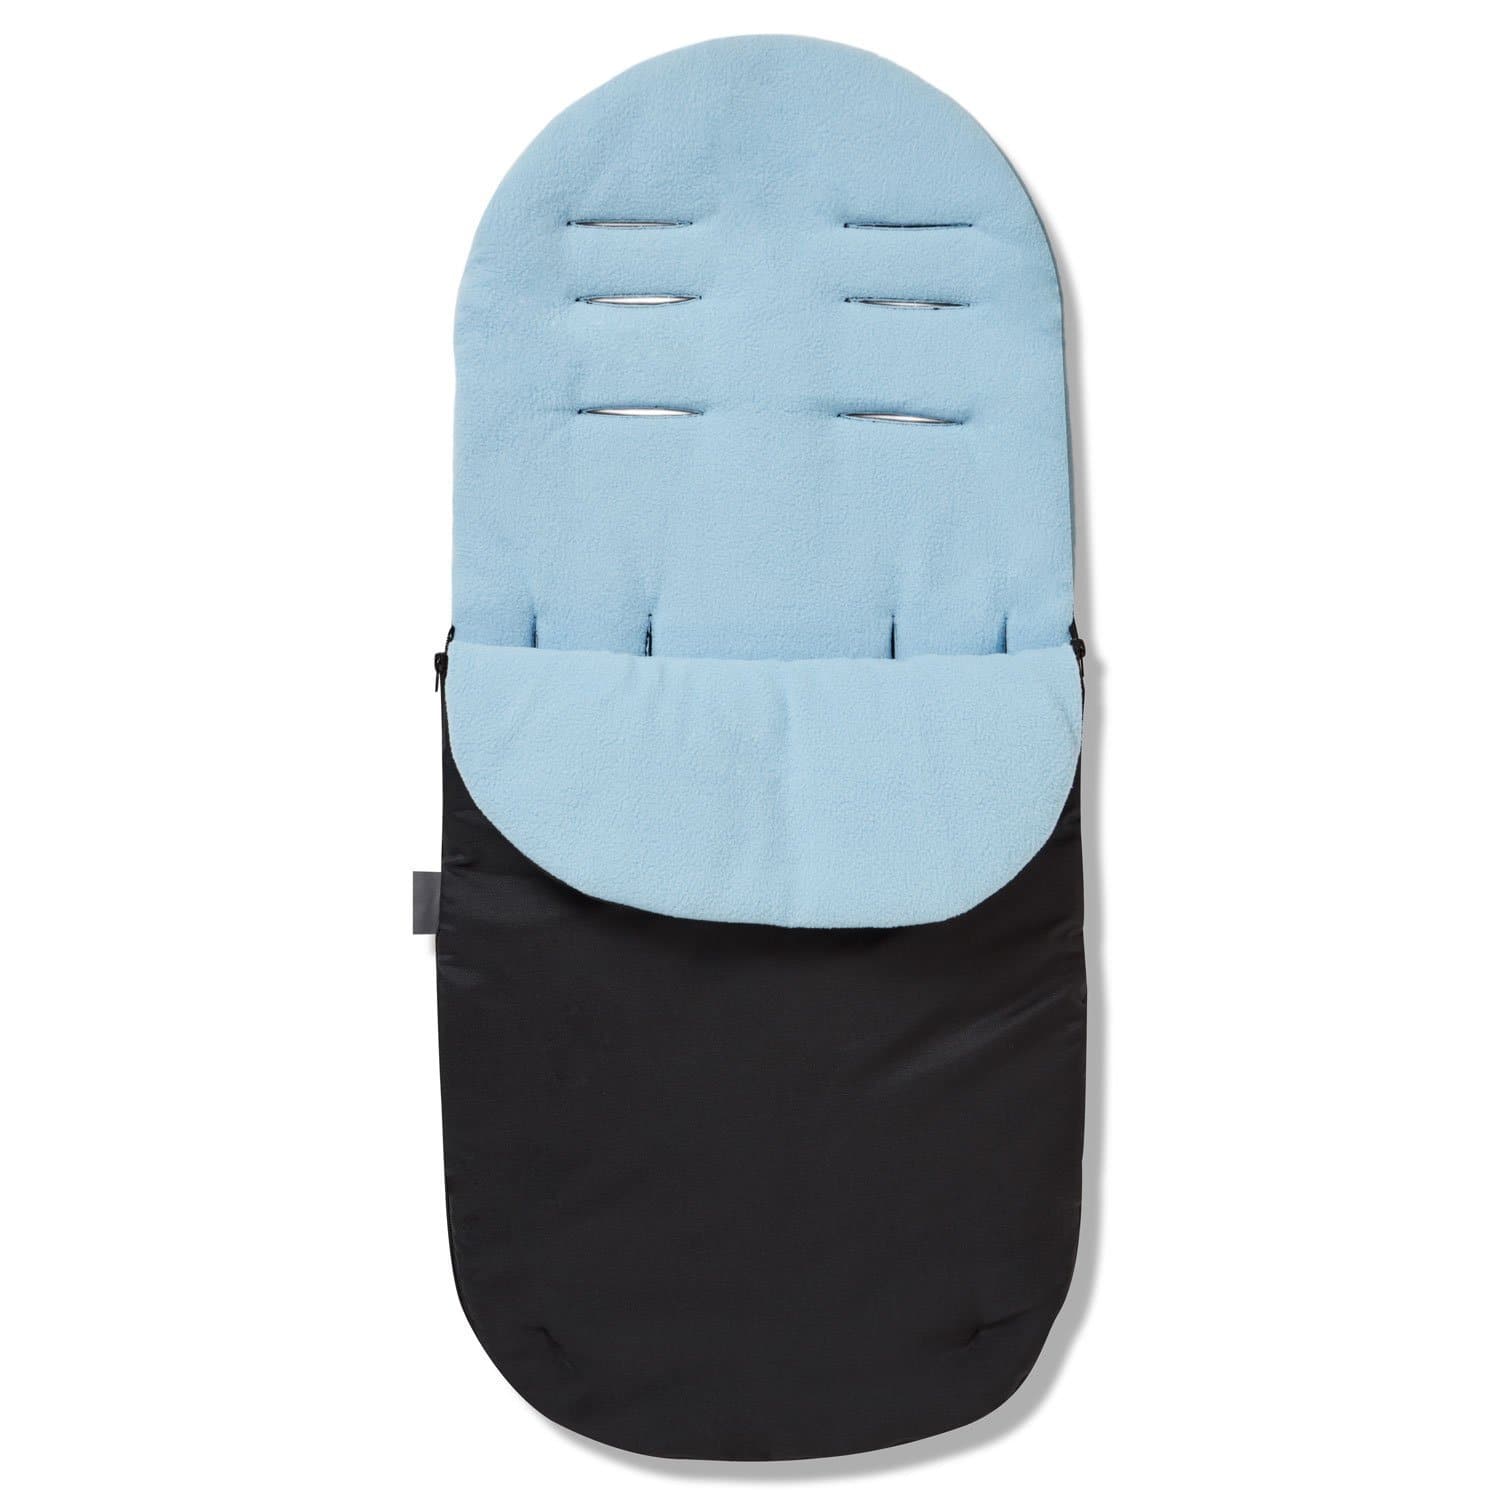 Footmuff / Cosy Toes Compatible with Emmaljunga - Light Blue / Fits All Models | For Your Little One